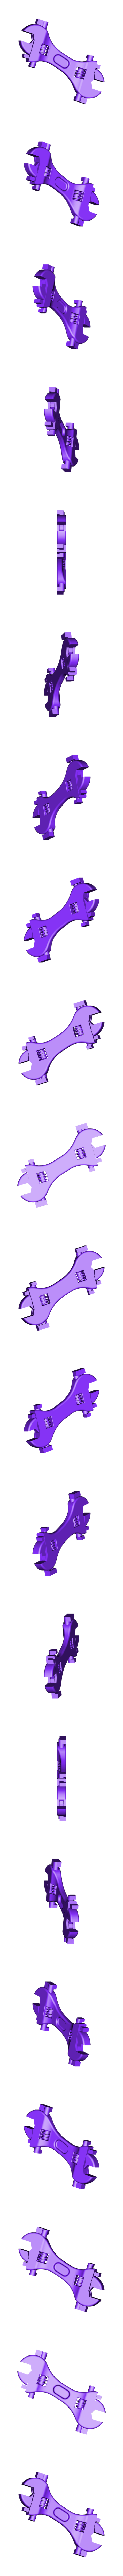 wrench-duo.stl Download free STL file Wrench Duo • 3D printer template, David_Mussaffi